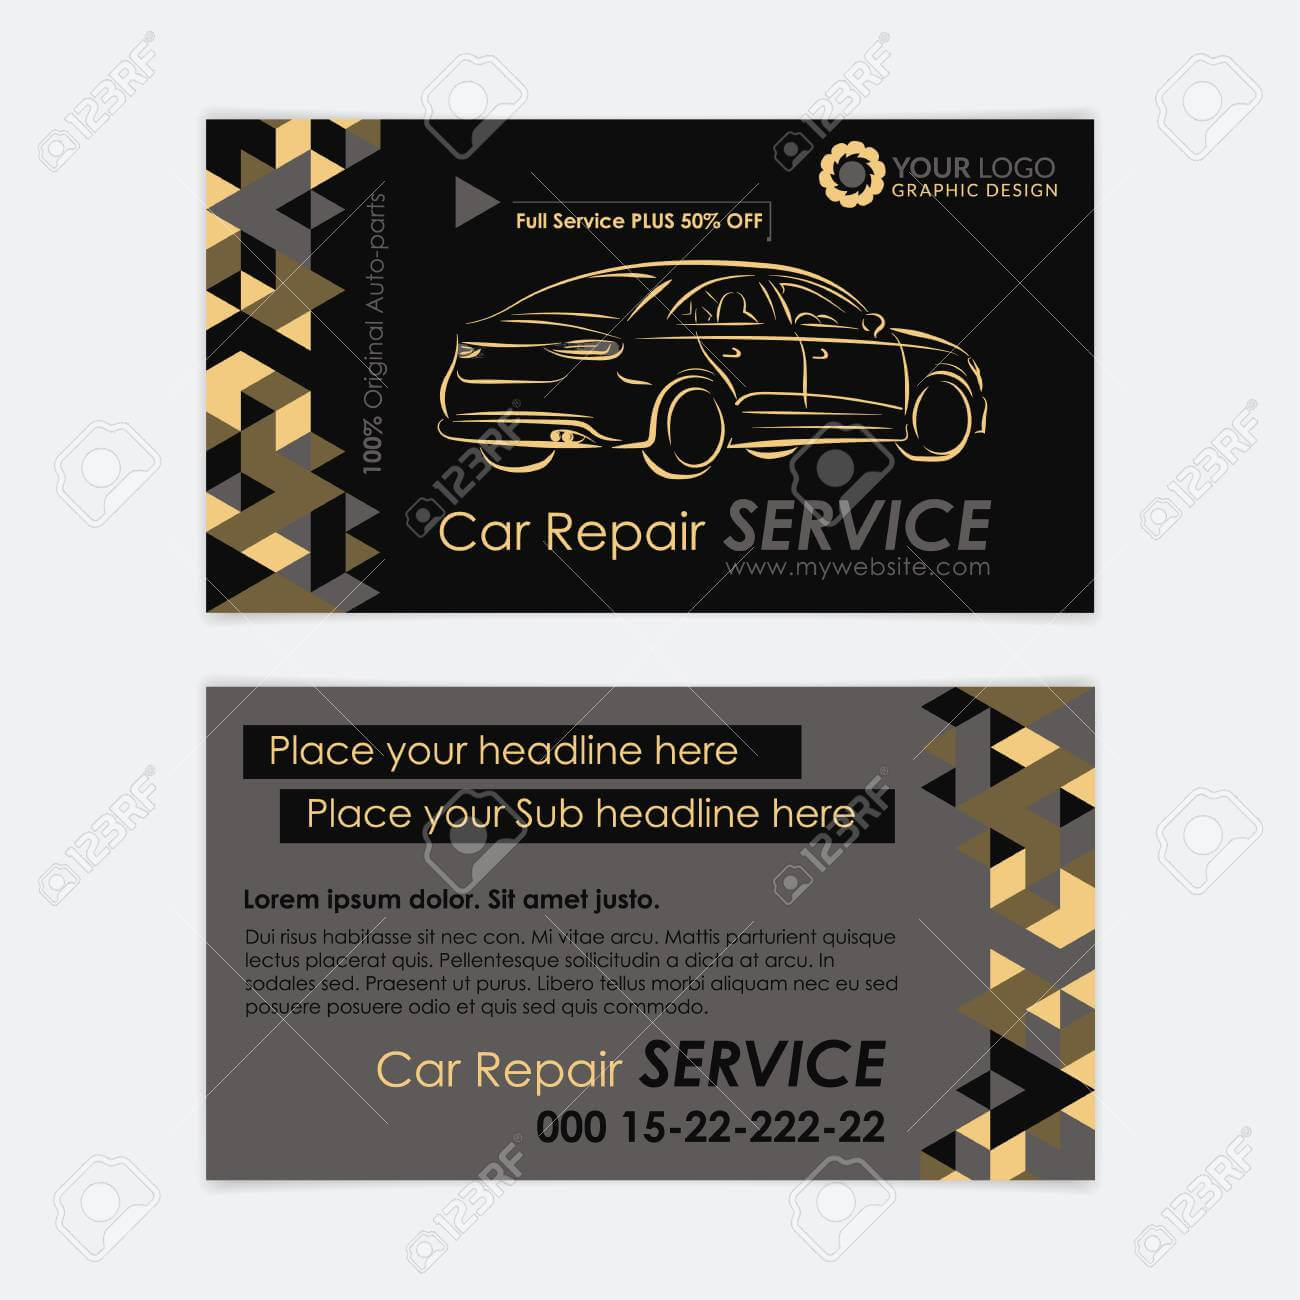 Automotive Service Business Card Template. Car Diagnostics And.. For Transport Business Cards Templates Free